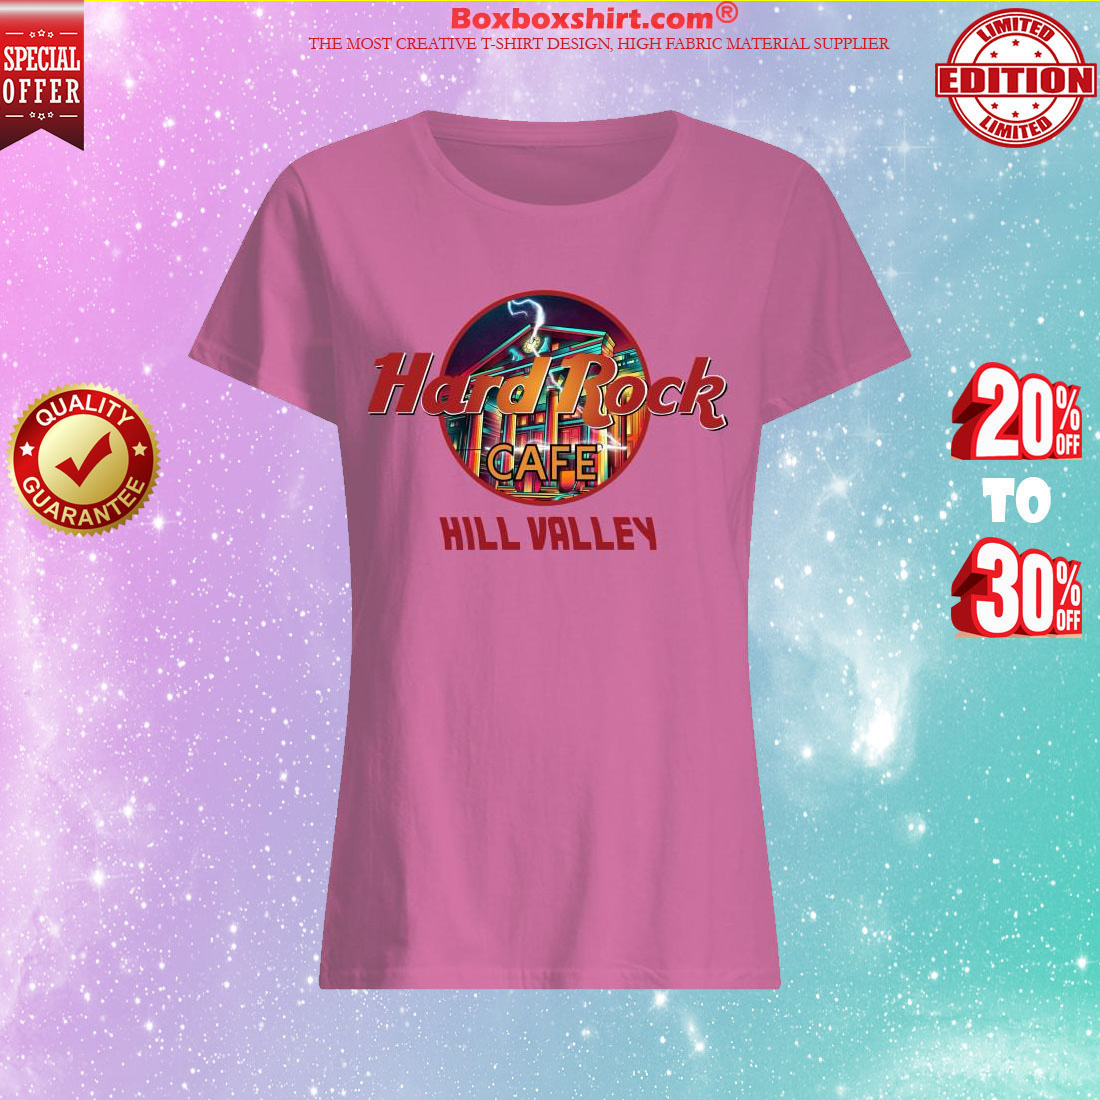 Hard rock cafe Hill valley classic shirt